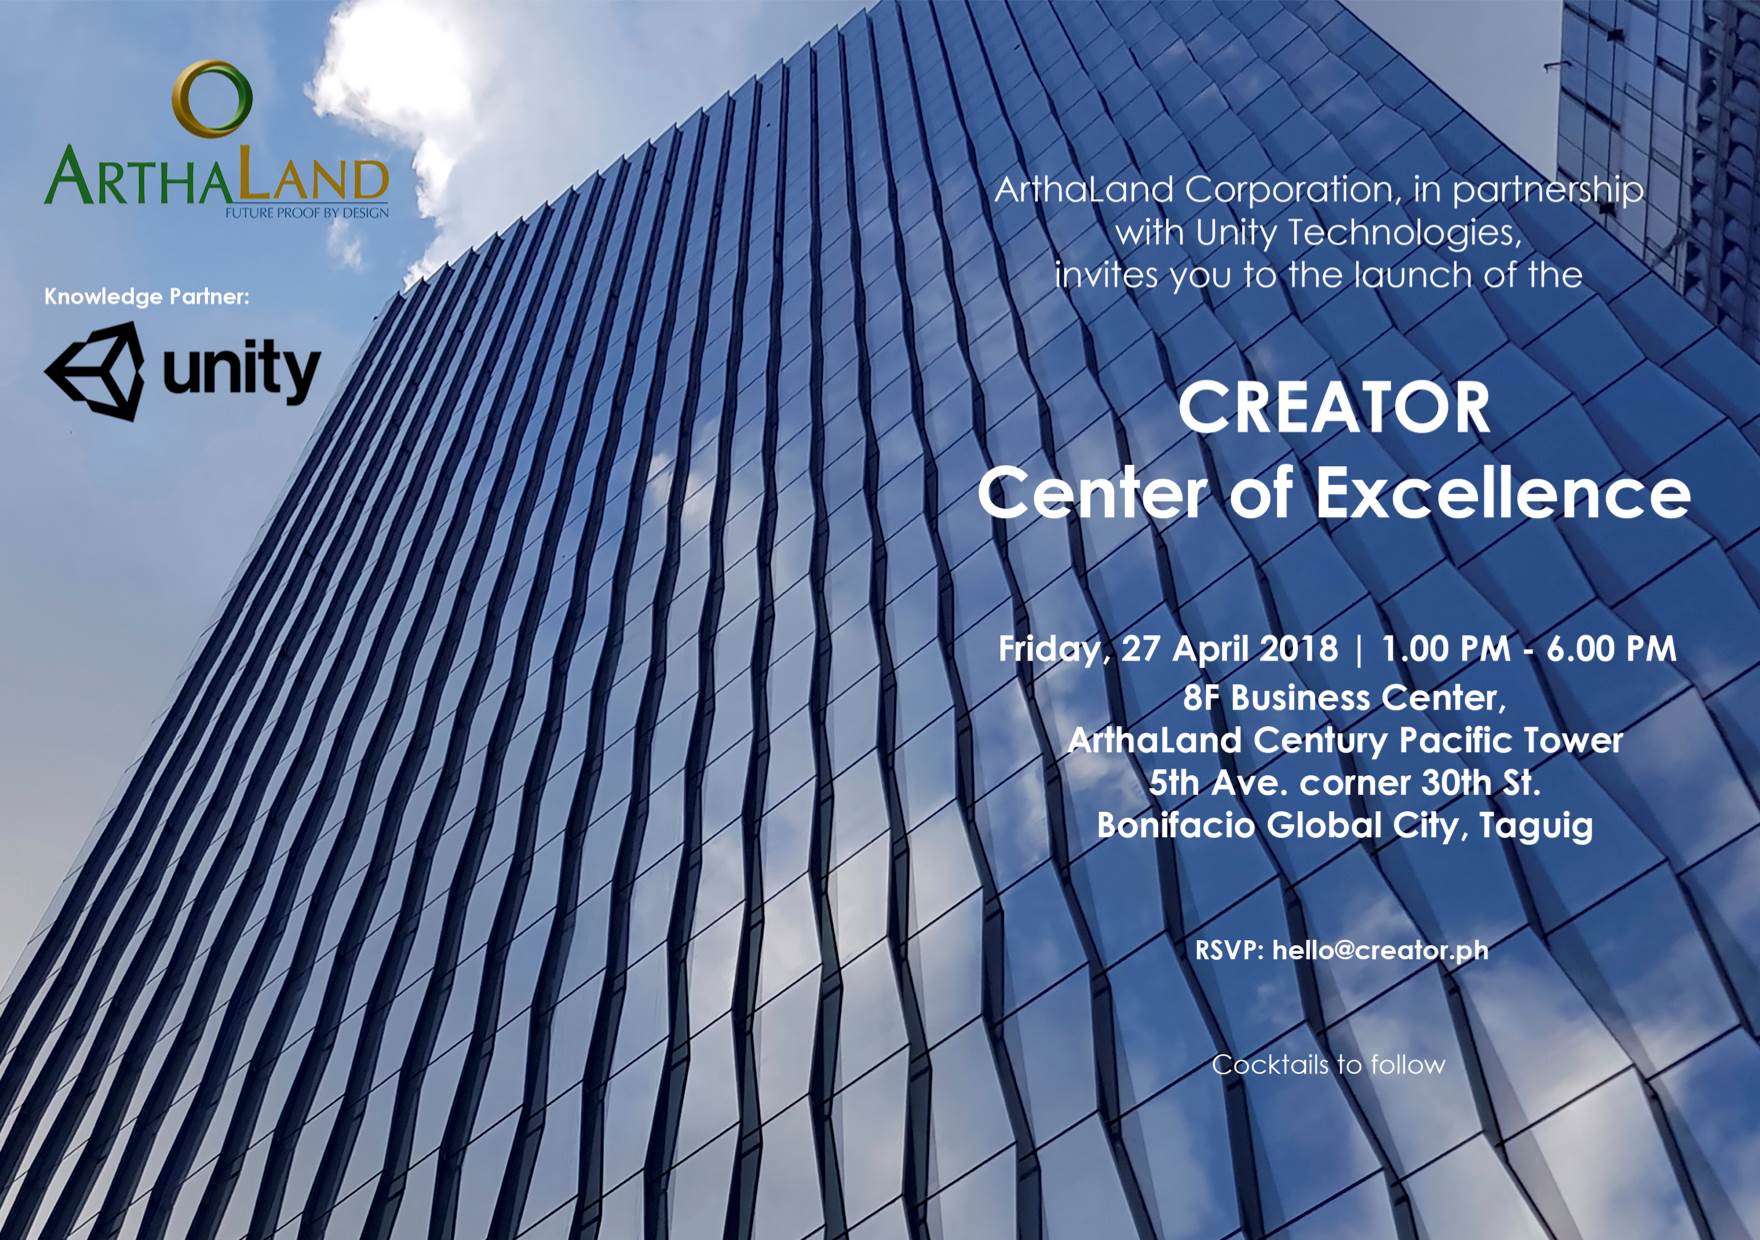 ArthaLand and Unity to Launch CREATOR Center of Excellence